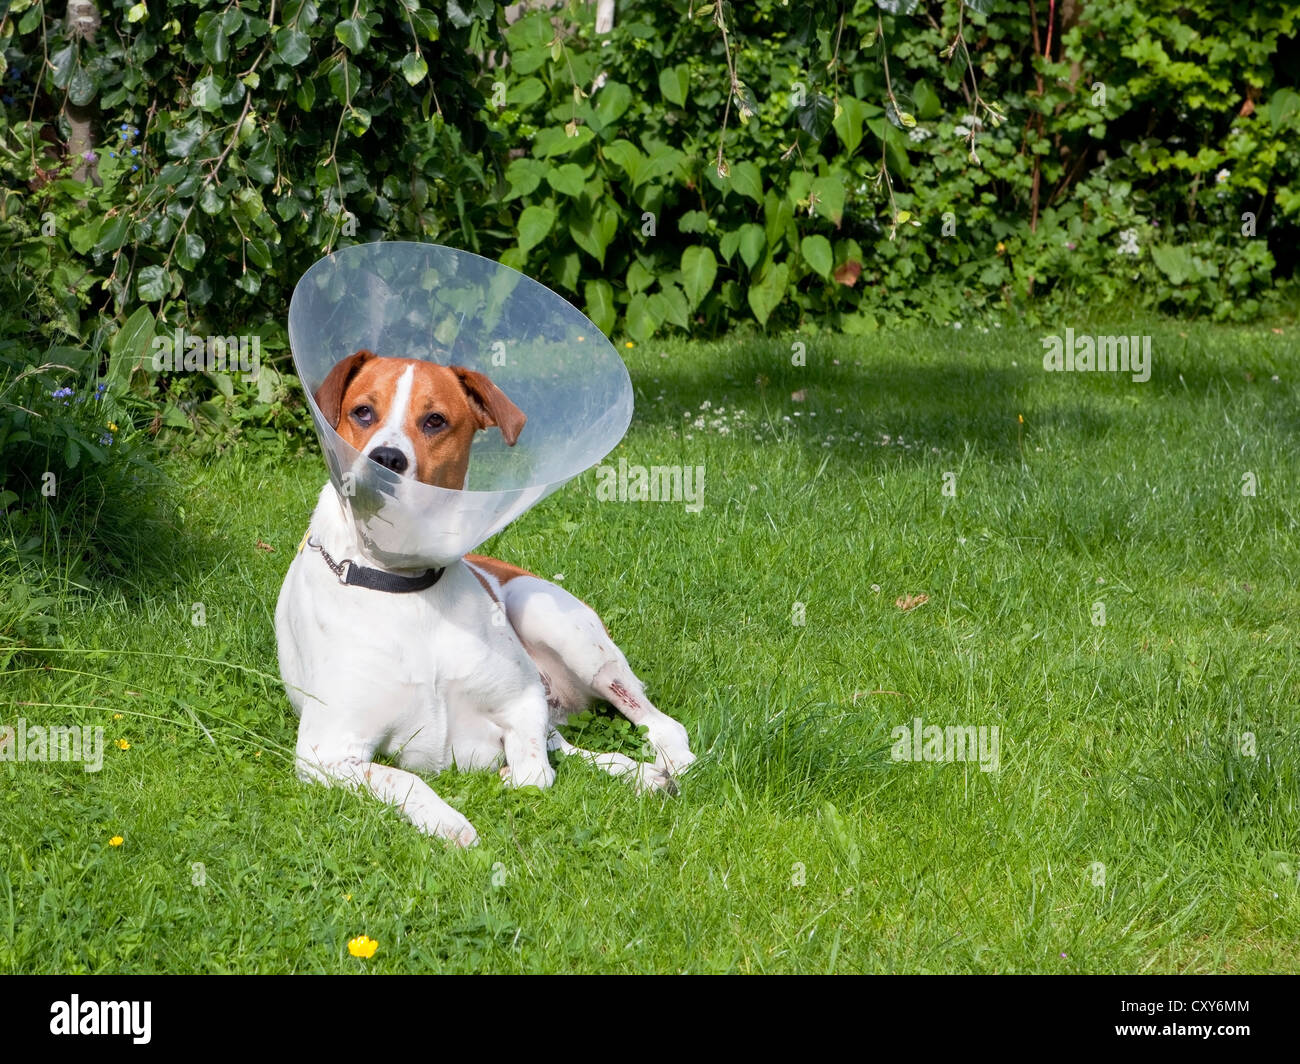 A cute brown and white dog wearing a protective plastic cone while recovering from an operation relaxes in a leafy garden Stock Photo